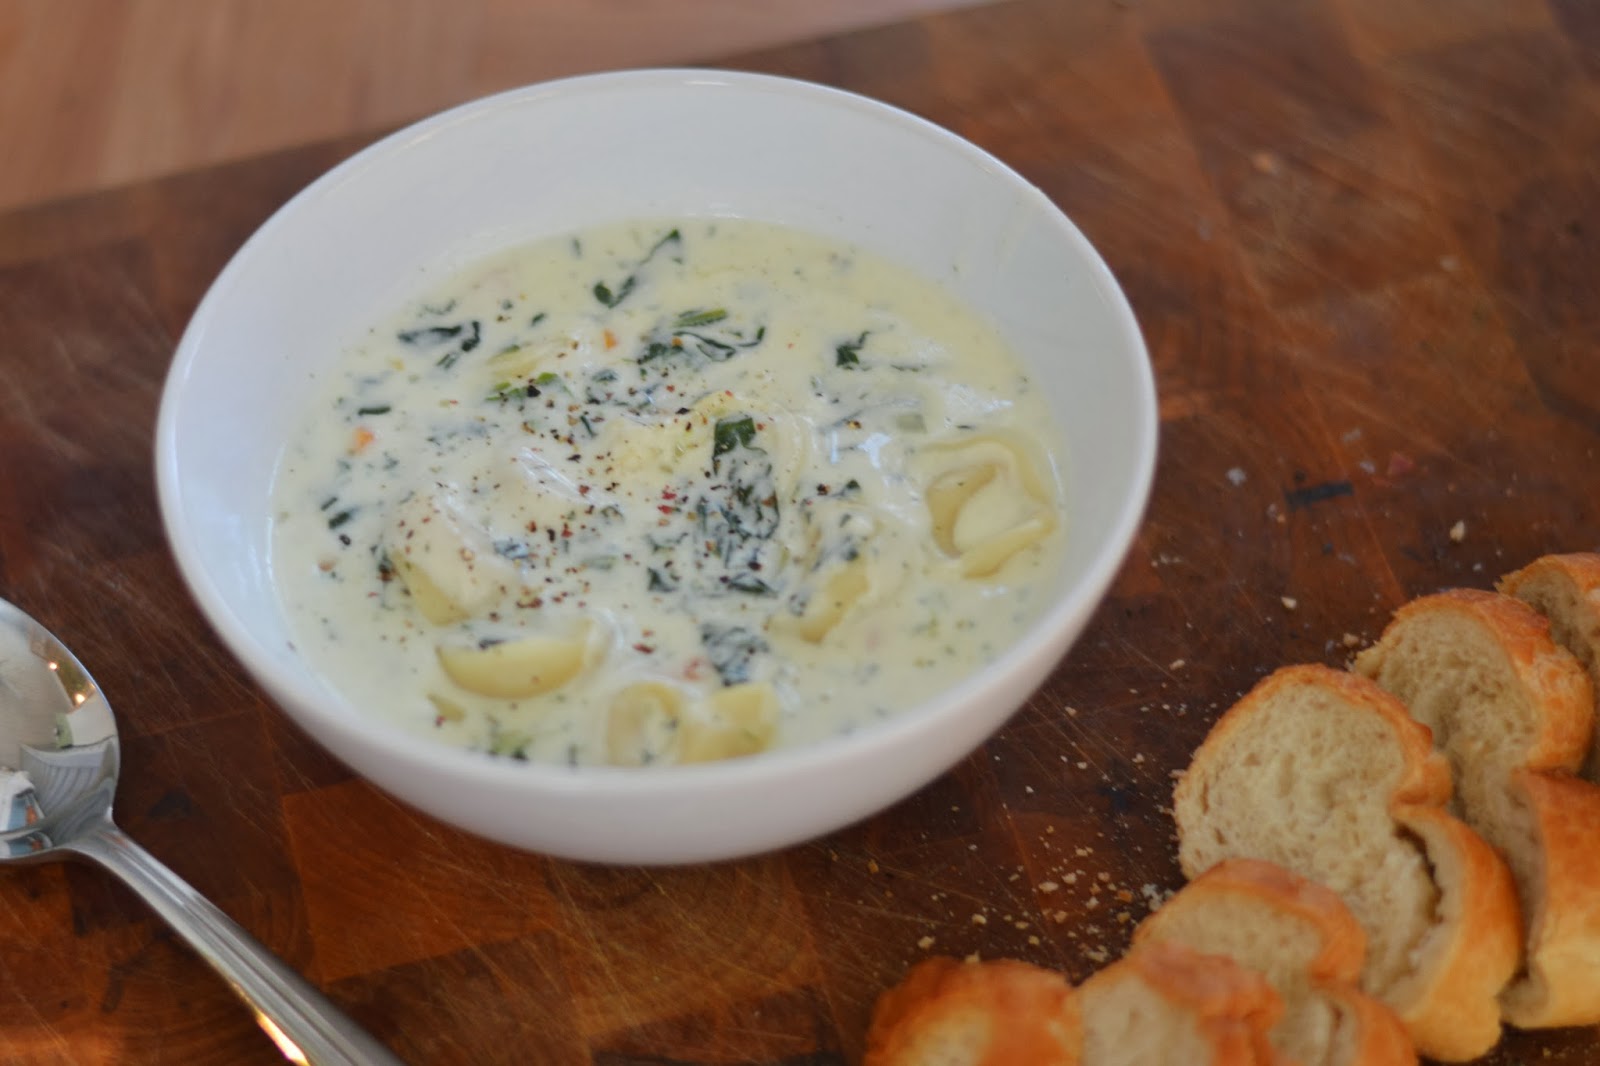 The Art of Comfort Baking: Creamy Tortellini Soup with Spinach